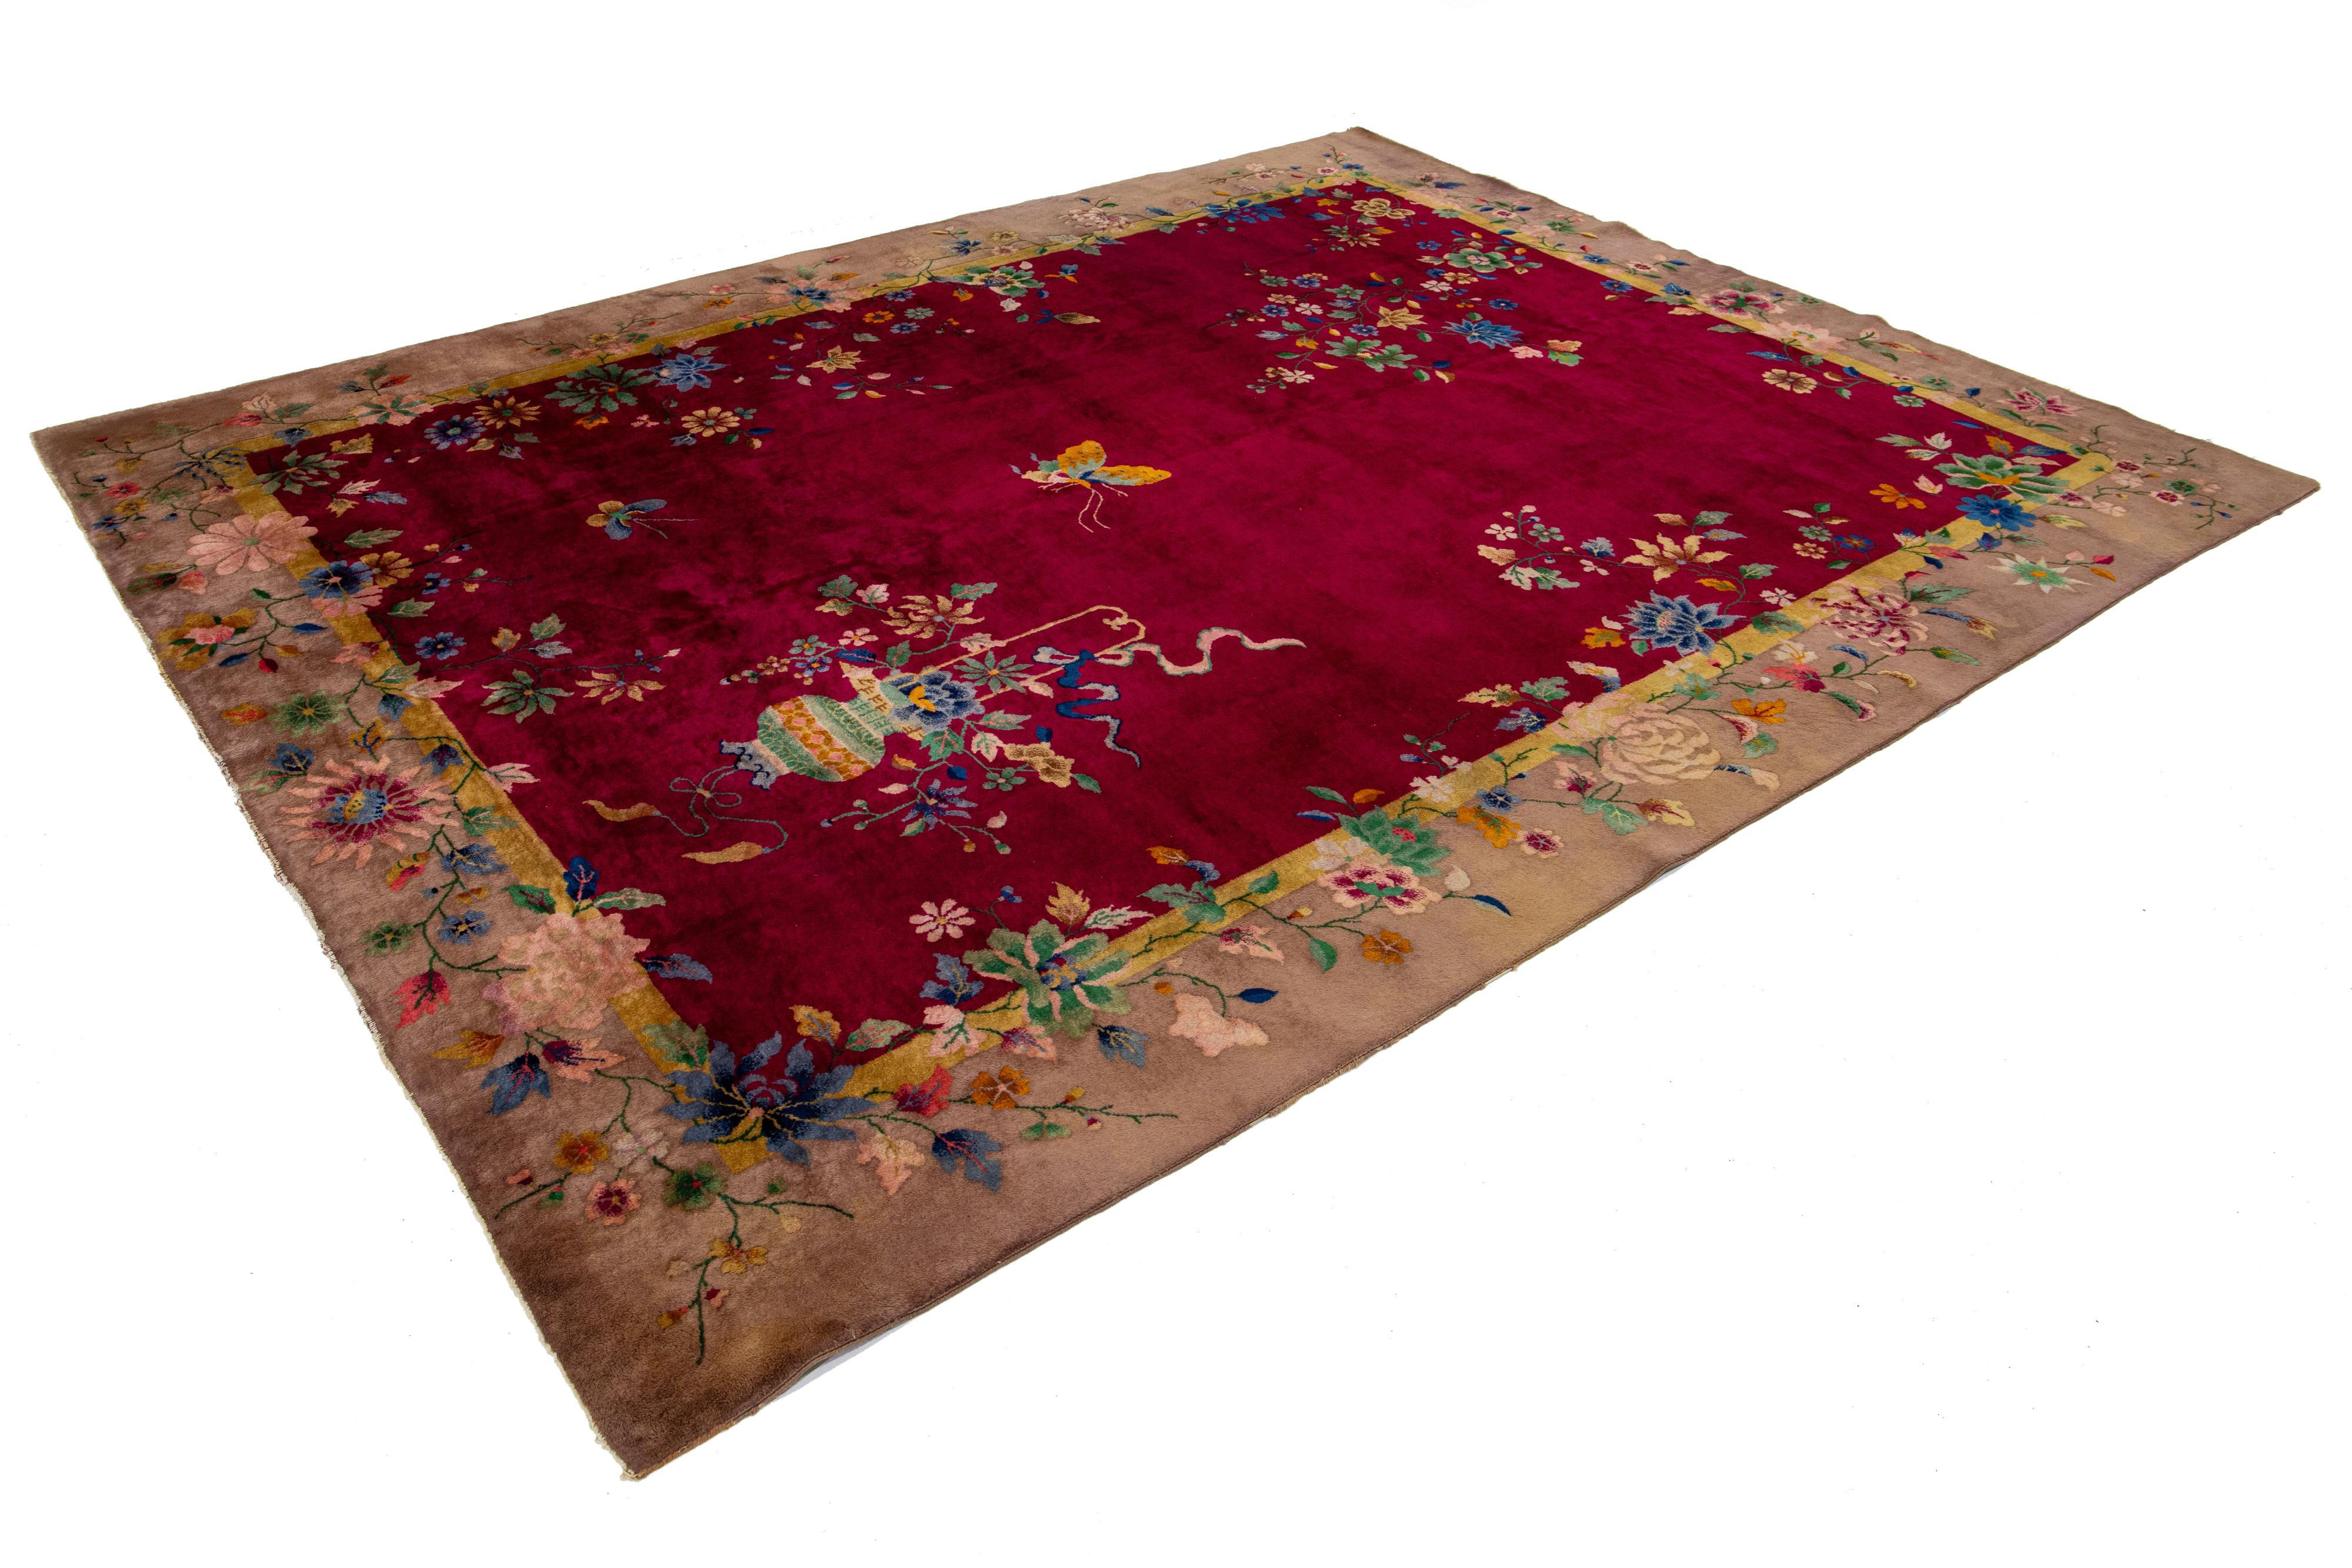 1920s Antique Chinese Art Deco Rug In Red with Floral Motif 3